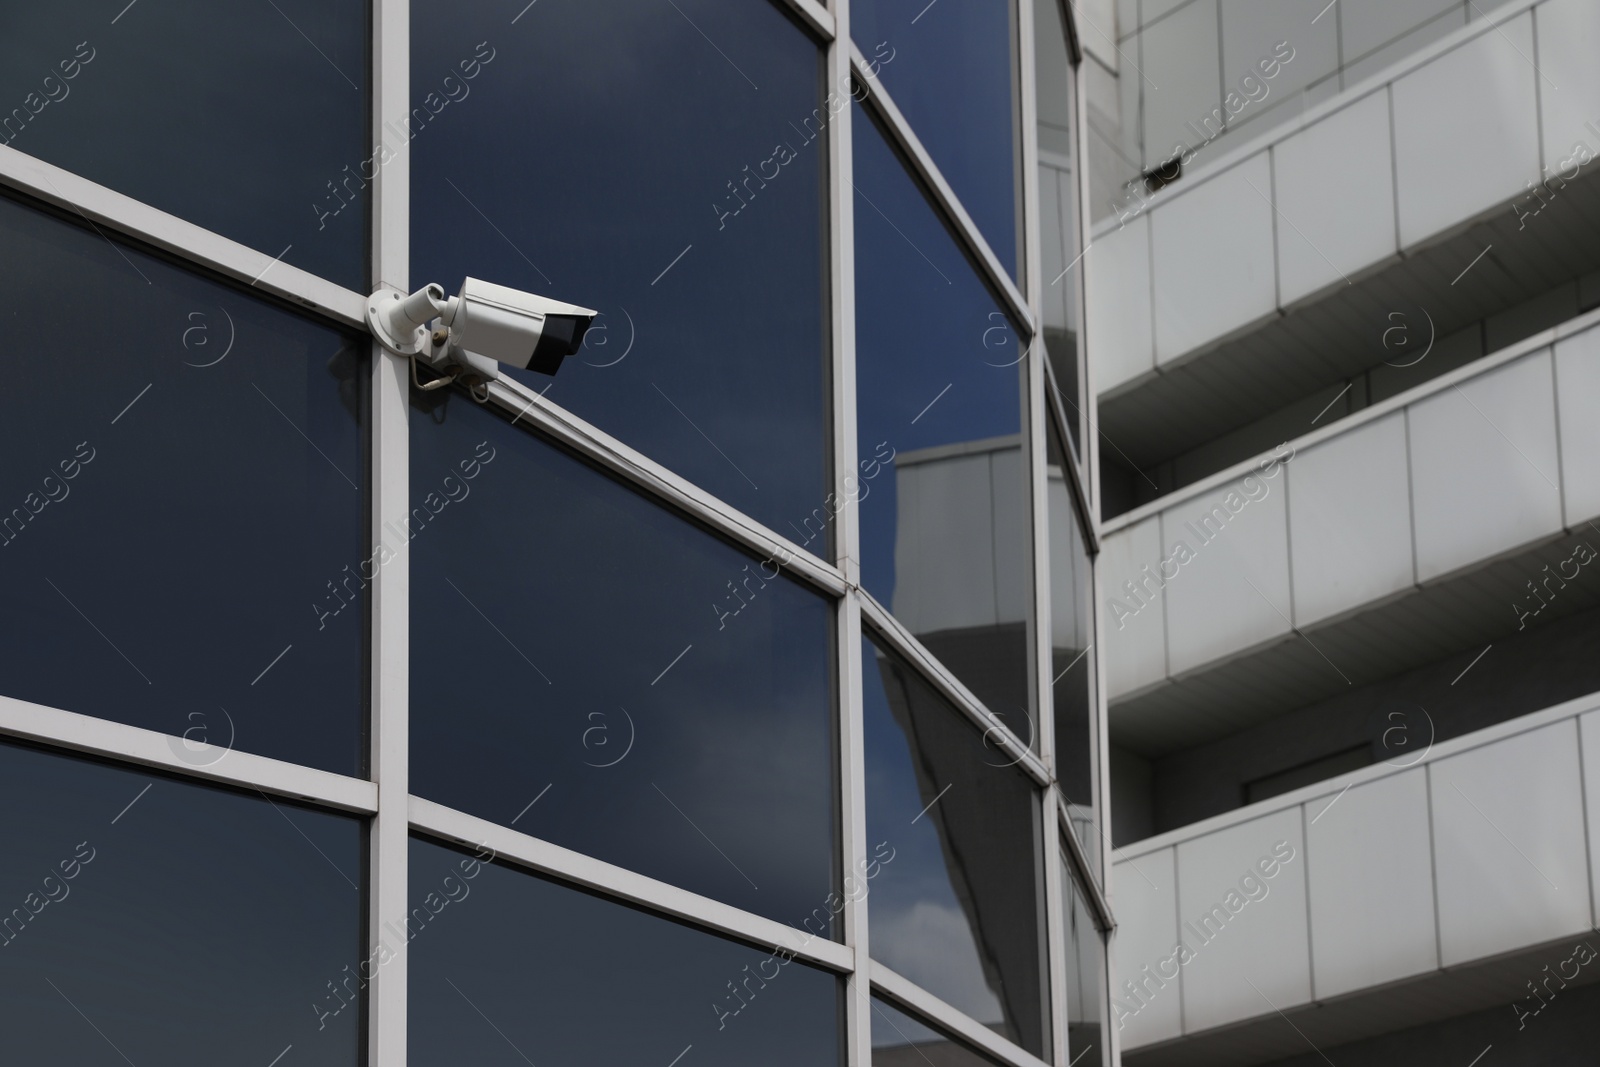 Photo of Modern building with tinted windows and CCTV camera, low angle view. Urban architecture